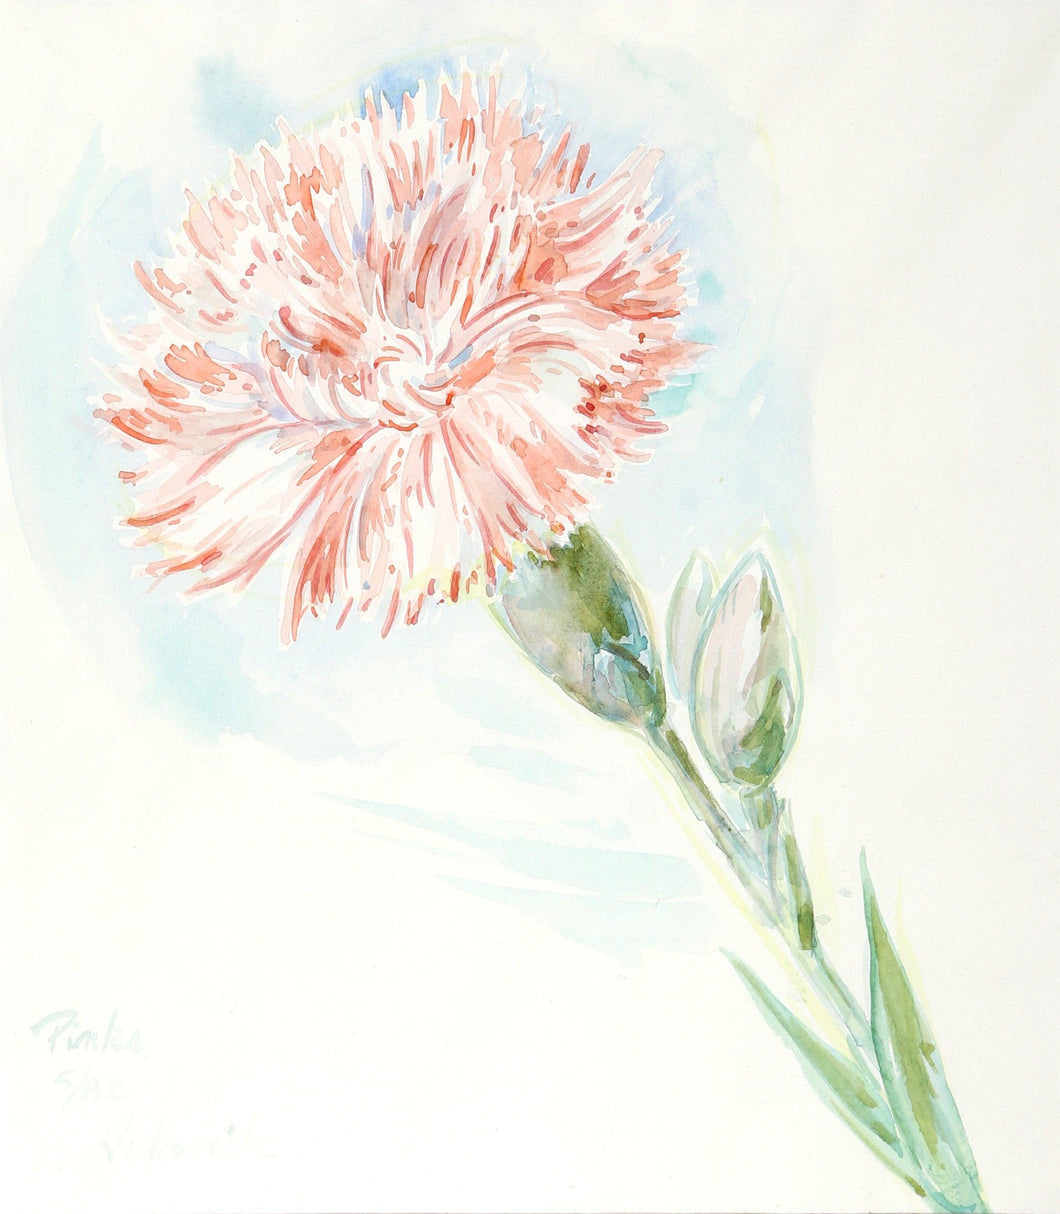 Pinks (Carnation) Watercolor | Charles Blaze Vukovich,{{product.type}}